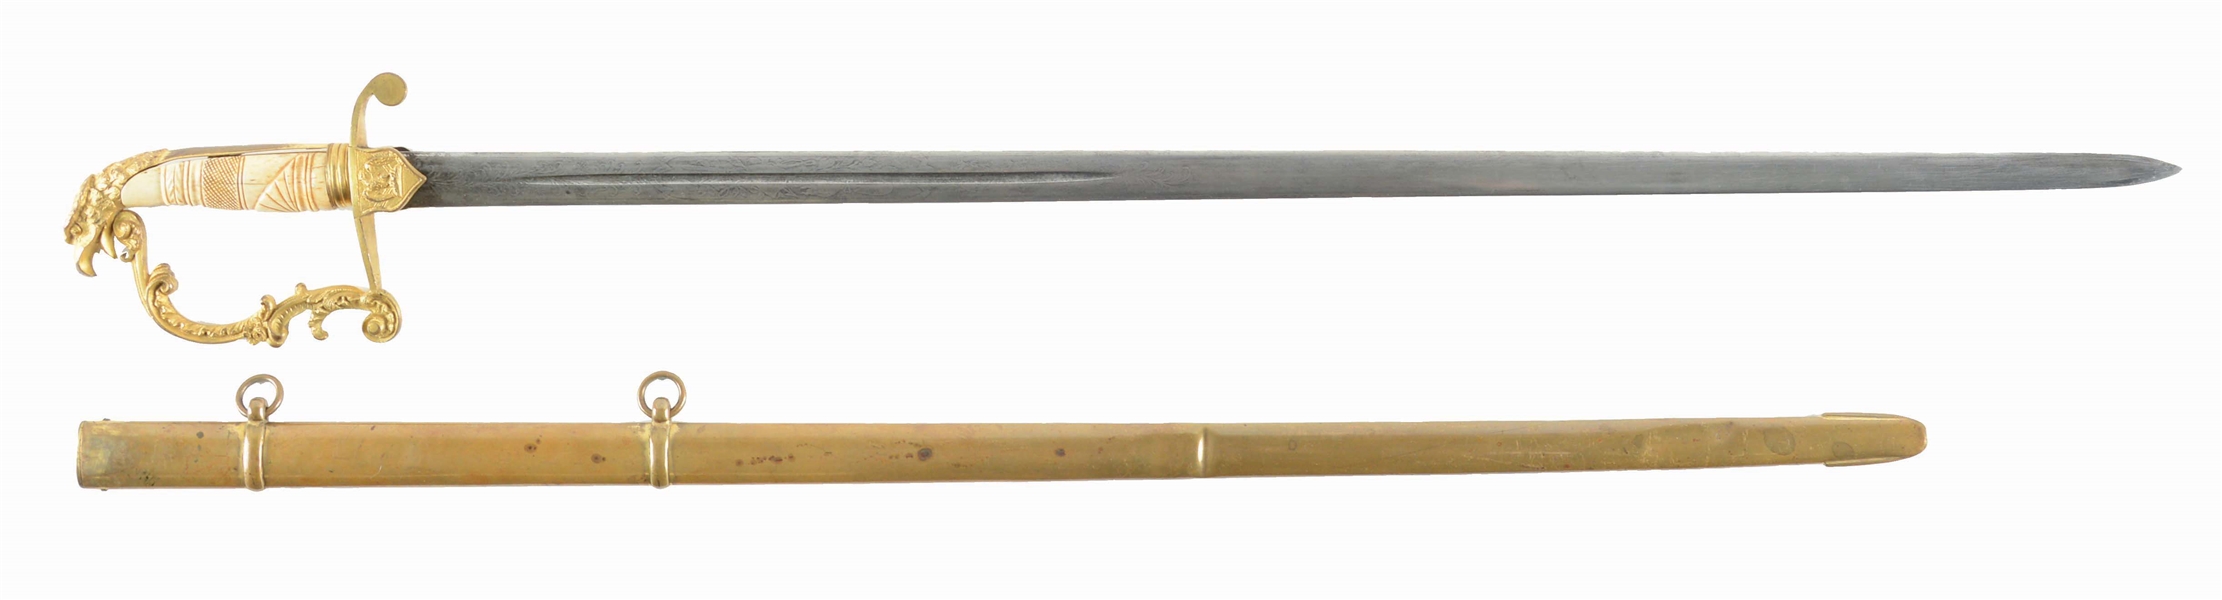 A GOOD AMERICAN EAGLE HILT OFFICERS SWORD WITH ELABORATE CARVED AND CHECKERED BONE GRIP, CIRCA 1840.